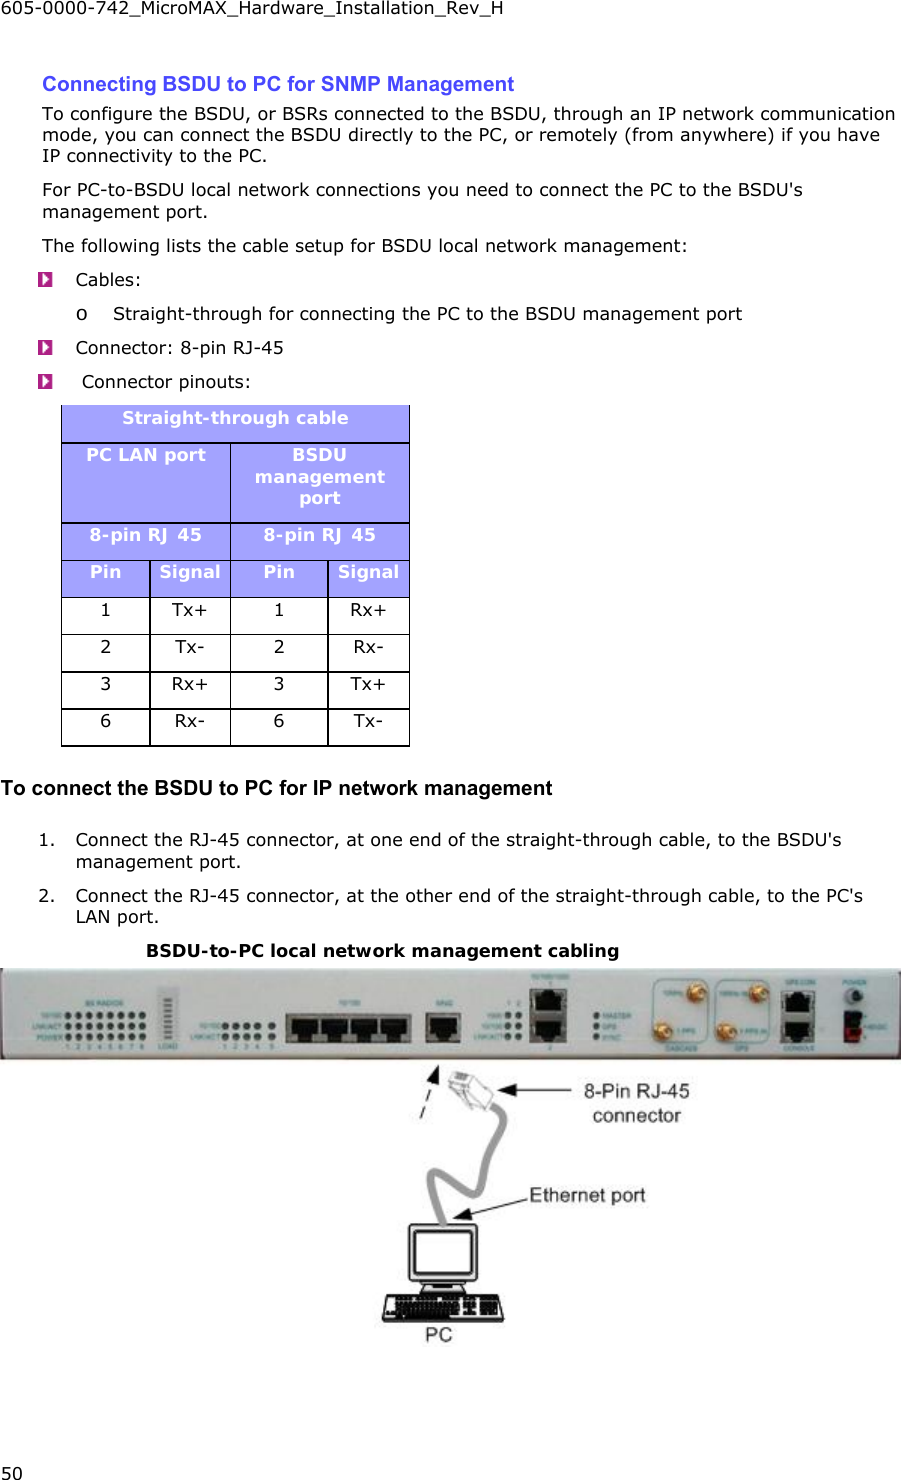 605-0000-742_MicroMAX_Hardware_Installation_Rev_H 50    Connecting BSDU to PC for SNMP Management To configure the BSDU, or BSRs connected to the BSDU, through an IP network communication mode, you can connect the BSDU directly to the PC, or remotely (from anywhere) if you have IP connectivity to the PC. For PC-to-BSDU local network connections you need to connect the PC to the BSDU&apos;s management port. The following lists the cable setup for BSDU local network management:  Cables:   o Straight-through for connecting the PC to the BSDU management port  Connector: 8-pin RJ-45    Connector pinouts:   Straight-through cable PC LAN port  BSDU management port 8-pin RJ 45  8-pin RJ 45 Pin  Signal  Pin  Signal 1 Tx+  1  Rx+ 2 Tx-  2  Rx- 3 Rx+  3  Tx+ 6 Rx-  6  Tx- To connect the BSDU to PC for IP network management 1. Connect the RJ-45 connector, at one end of the straight-through cable, to the BSDU&apos;s management port. 2. Connect the RJ-45 connector, at the other end of the straight-through cable, to the PC&apos;s LAN port. BSDU-to-PC local network management cabling  